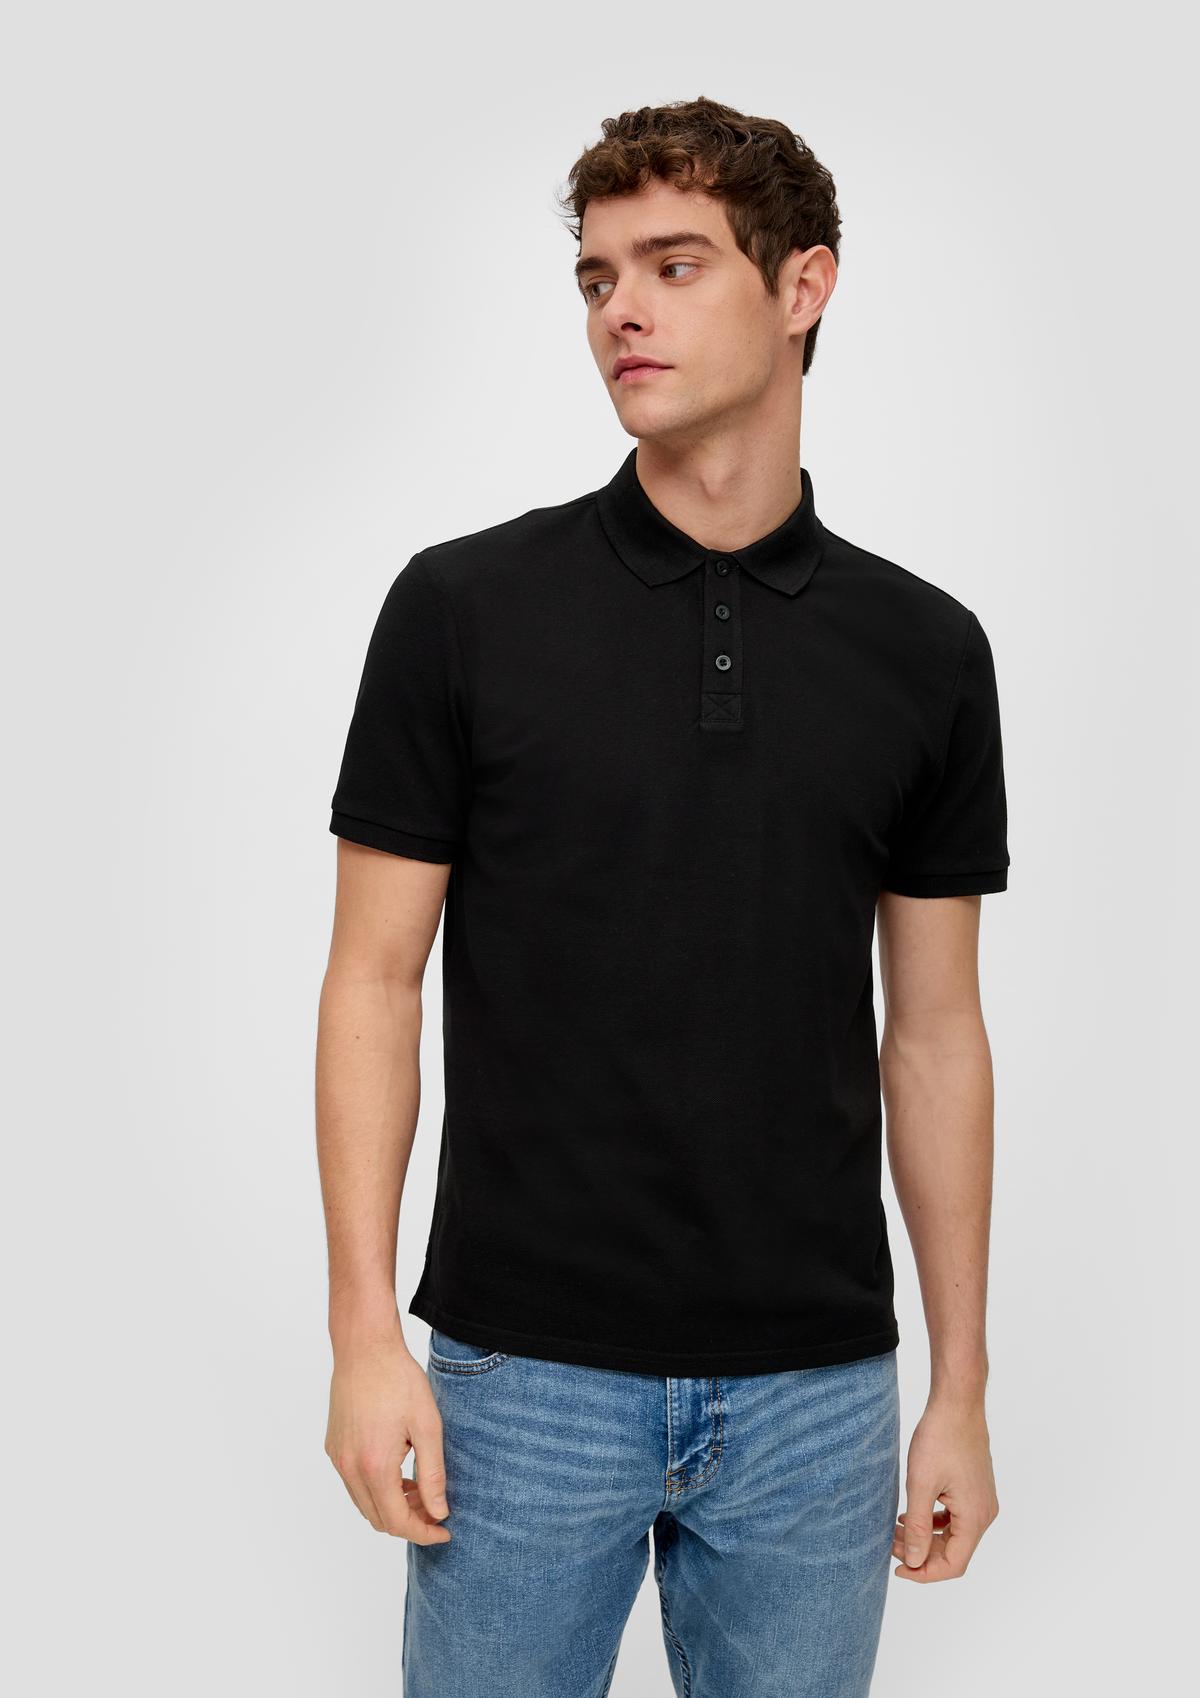 Polo in basic stijl